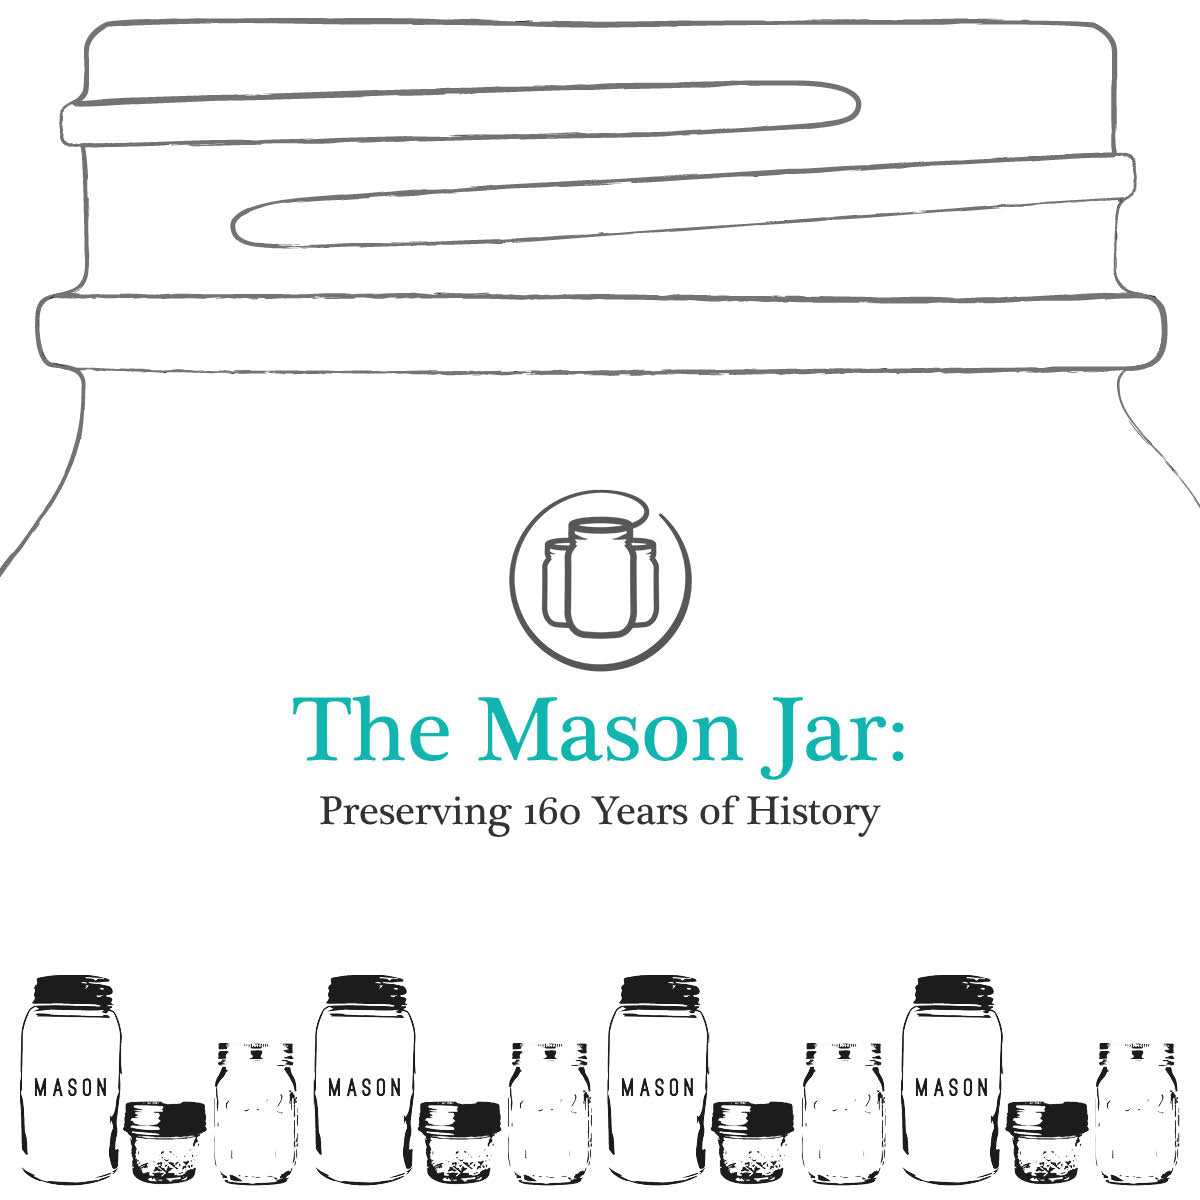 The Mason Jar: Preserving 160 Years of History eBook Download